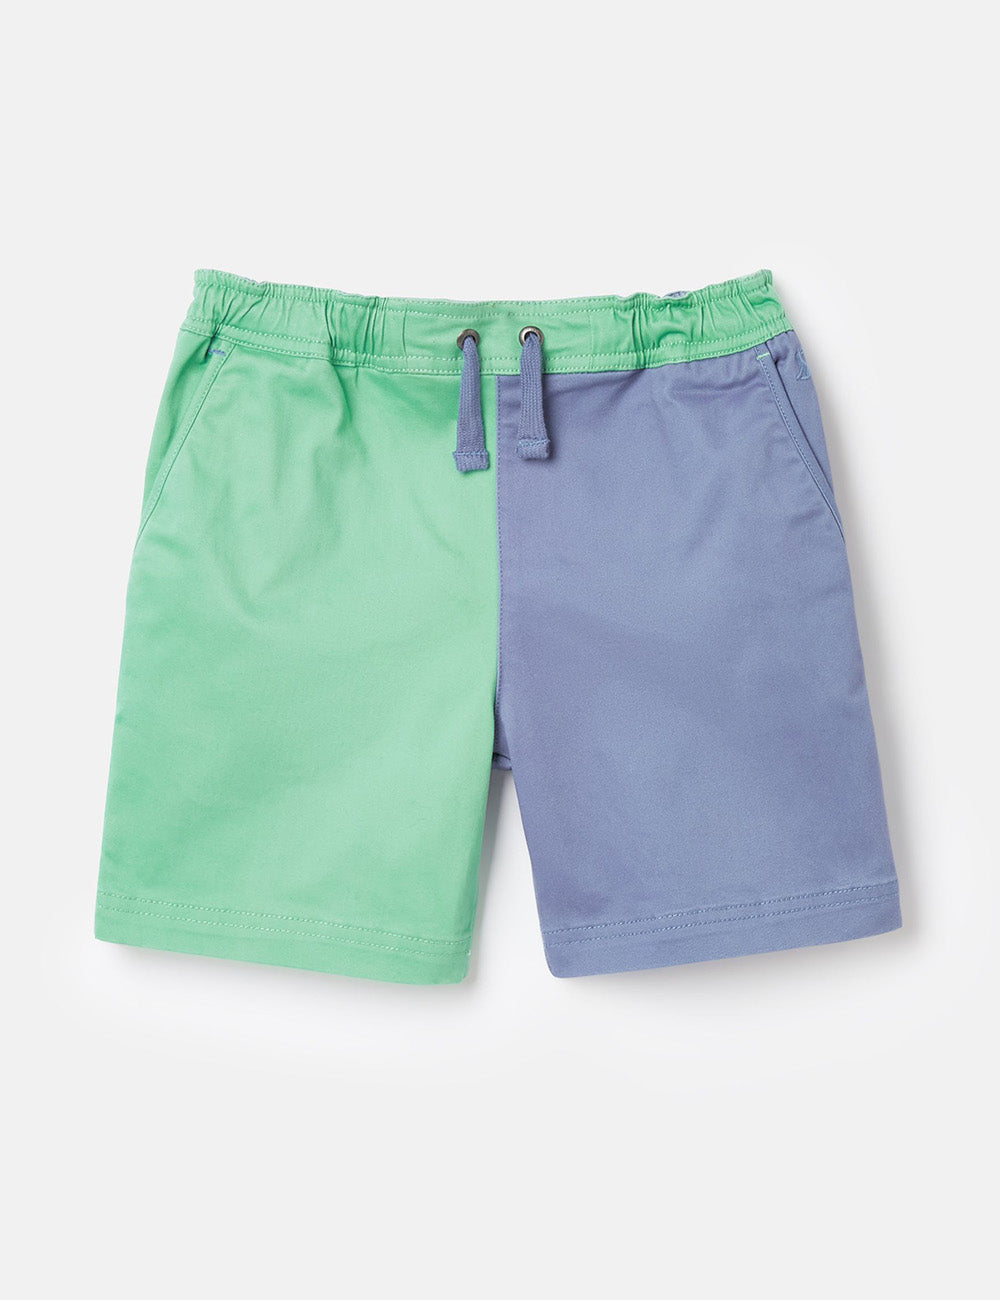 Joules Spencer Chino Short - Blue/Green Hotchpotch